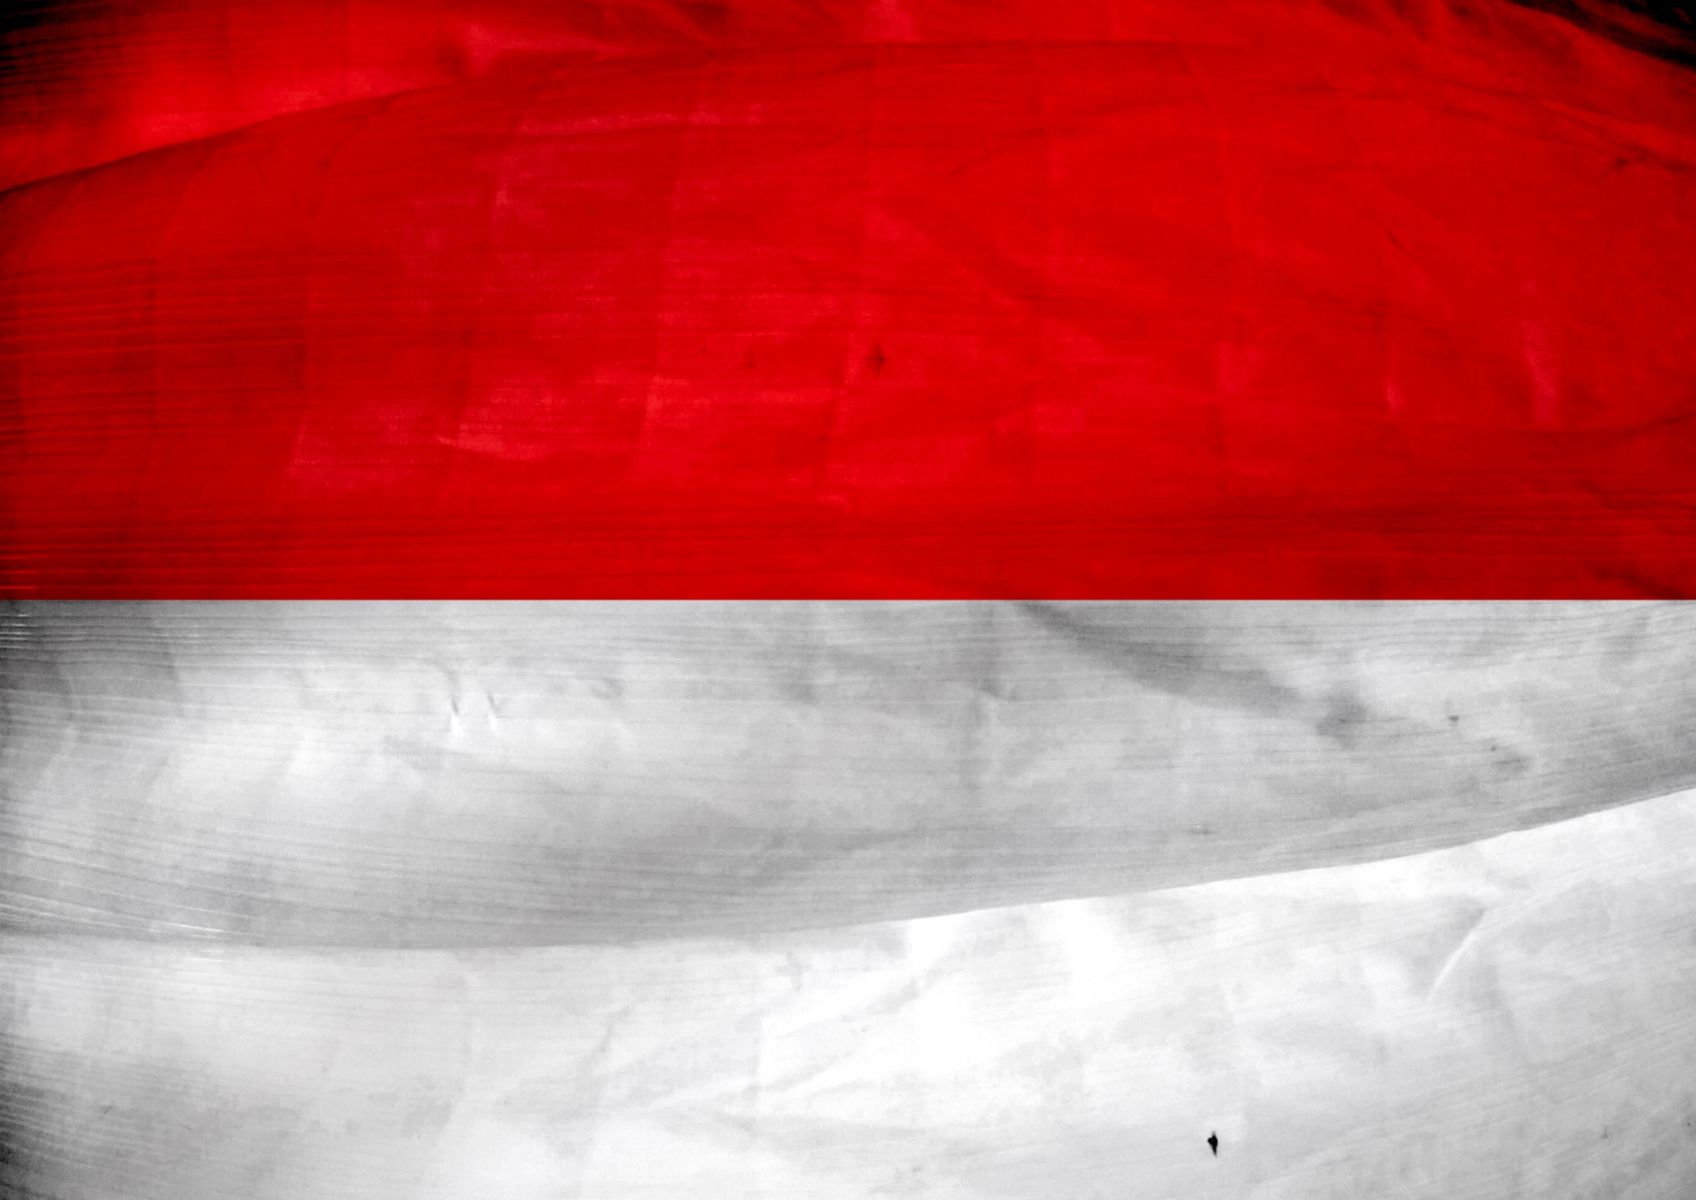 My Country INDONESIA: Hand-Painted Band for Apple Watch Inspired by NATIONAL FLAG of Indonesia